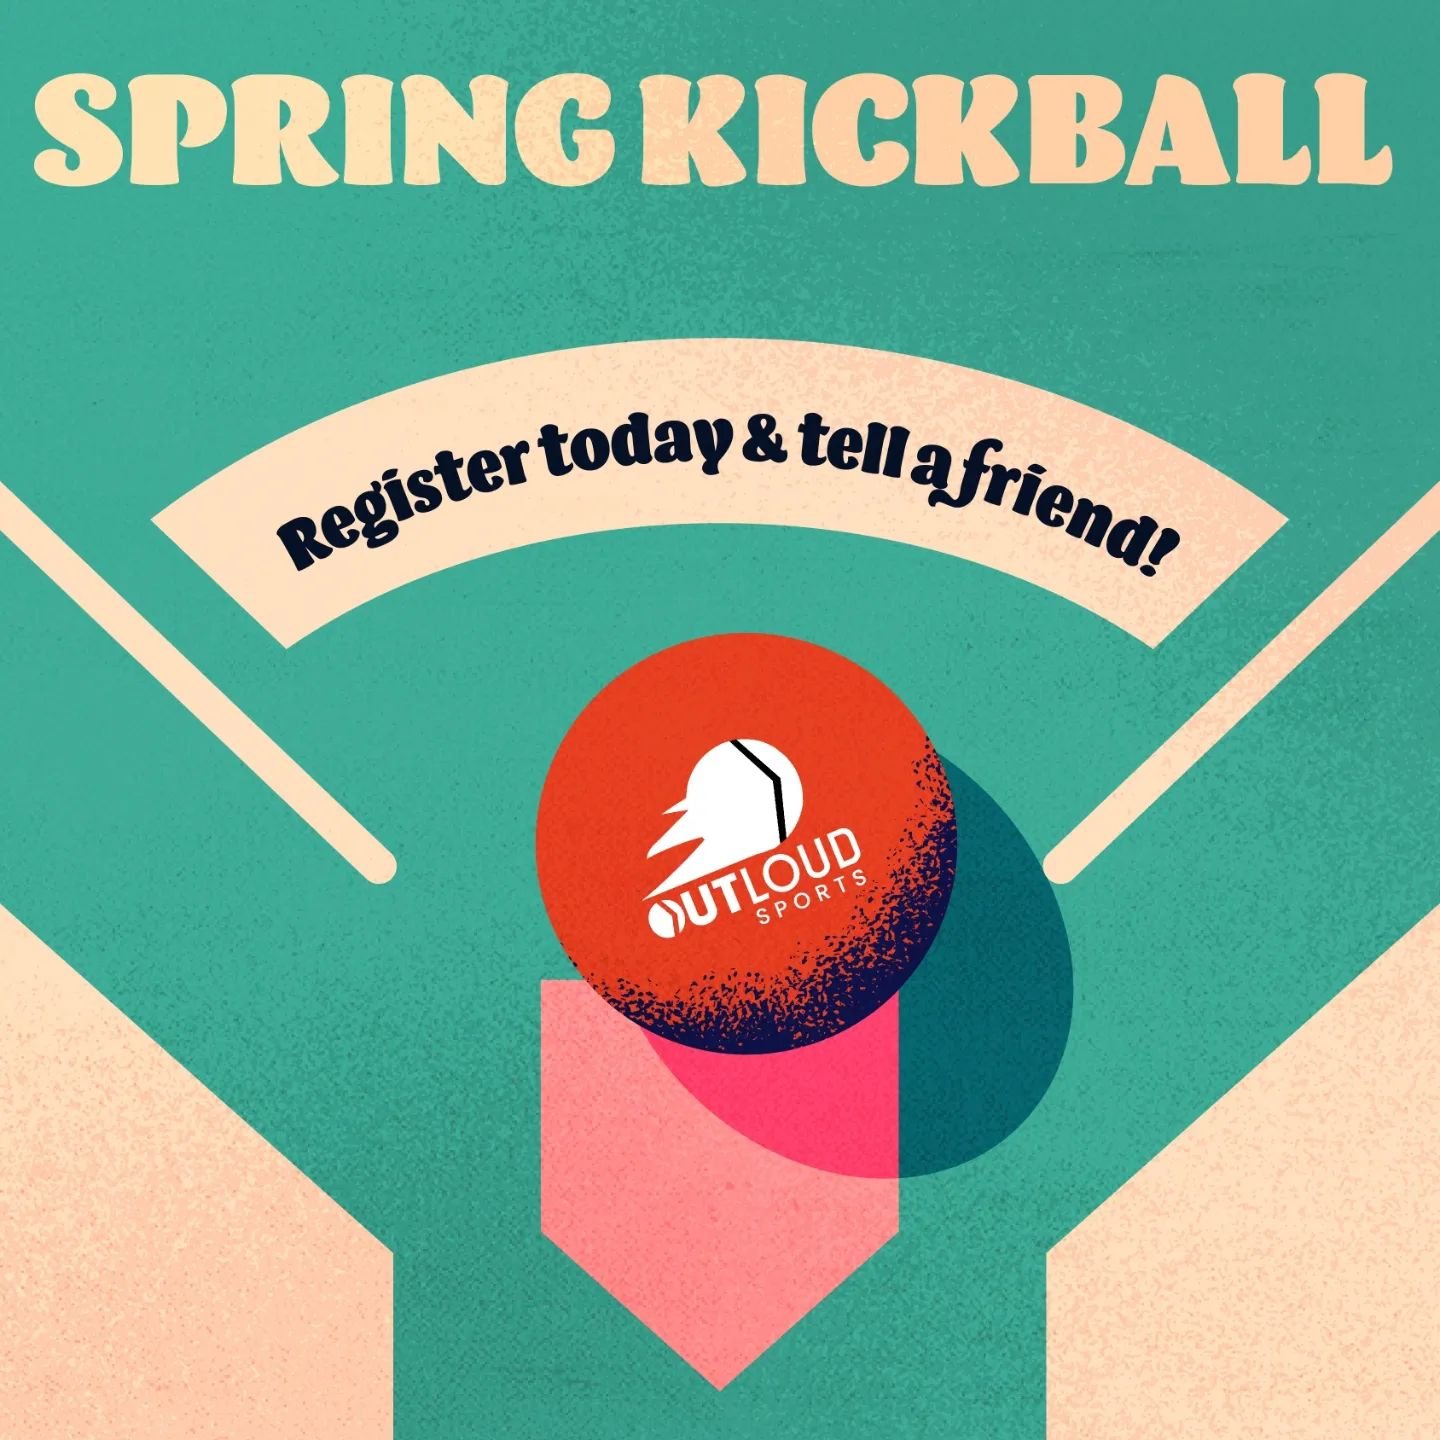 Not registered for kickball yet!? Today's the day, there's not much time left. And why join alone when you can join with a friend. Head to the link in our bio and register for the season!